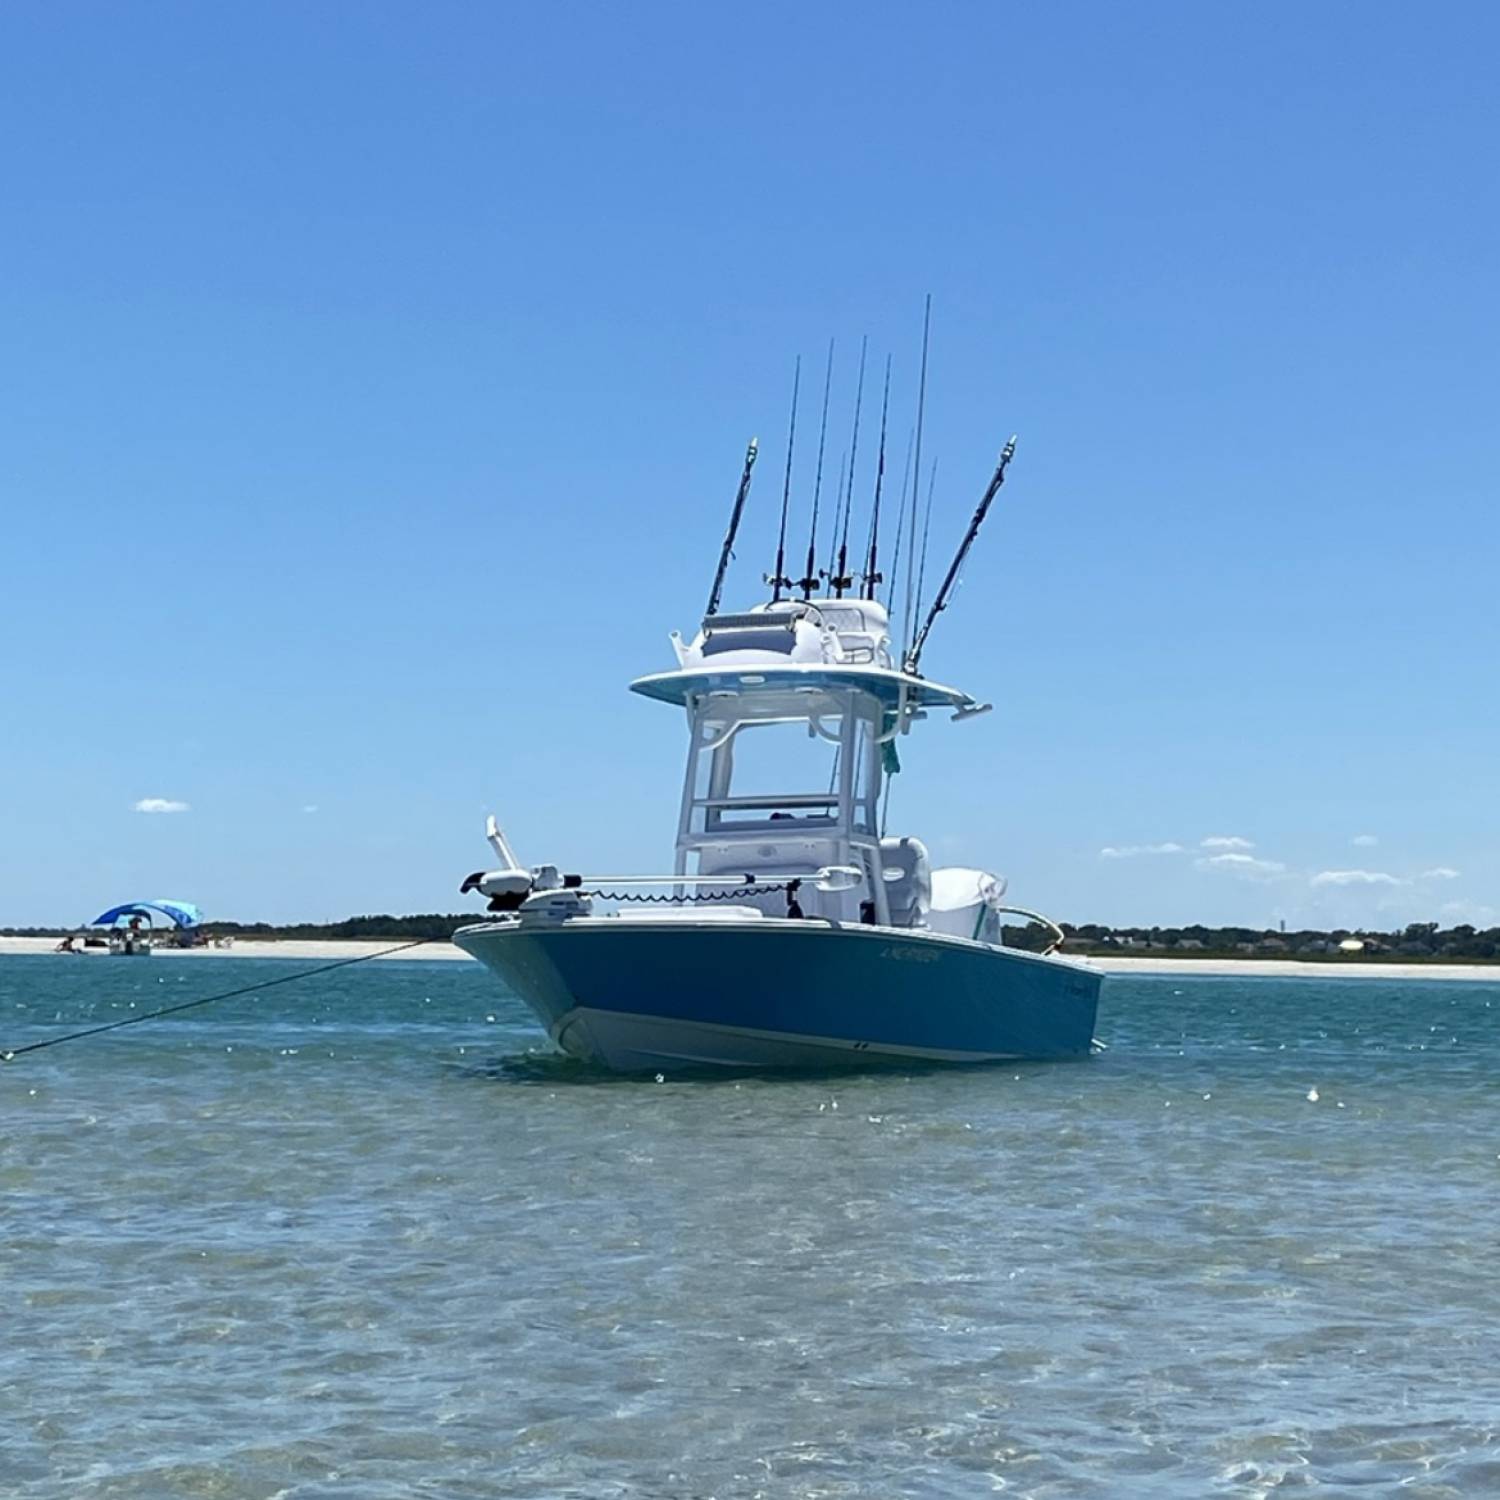 Title: Time to chill - On board their Sportsman Masters 247 Bay Boat - Location: Mason’s inlet, wrightsville beach, nc. Participating in the Photo Contest #SportsmanJuly